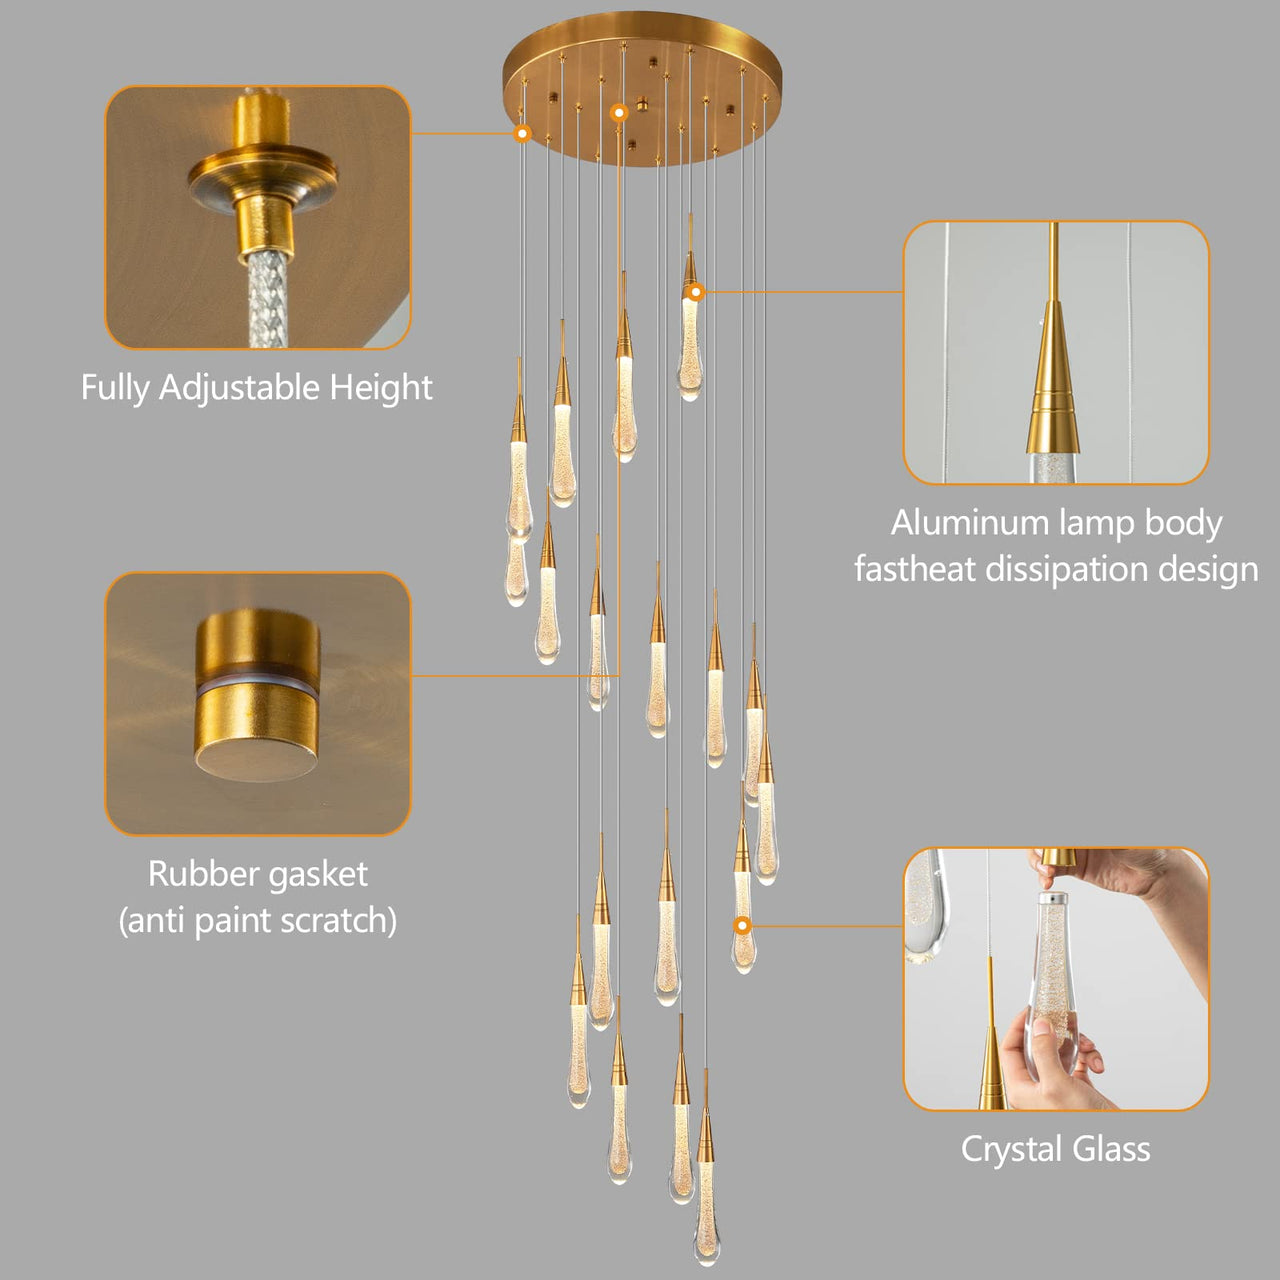 Stylish chandelier for upscale staircases